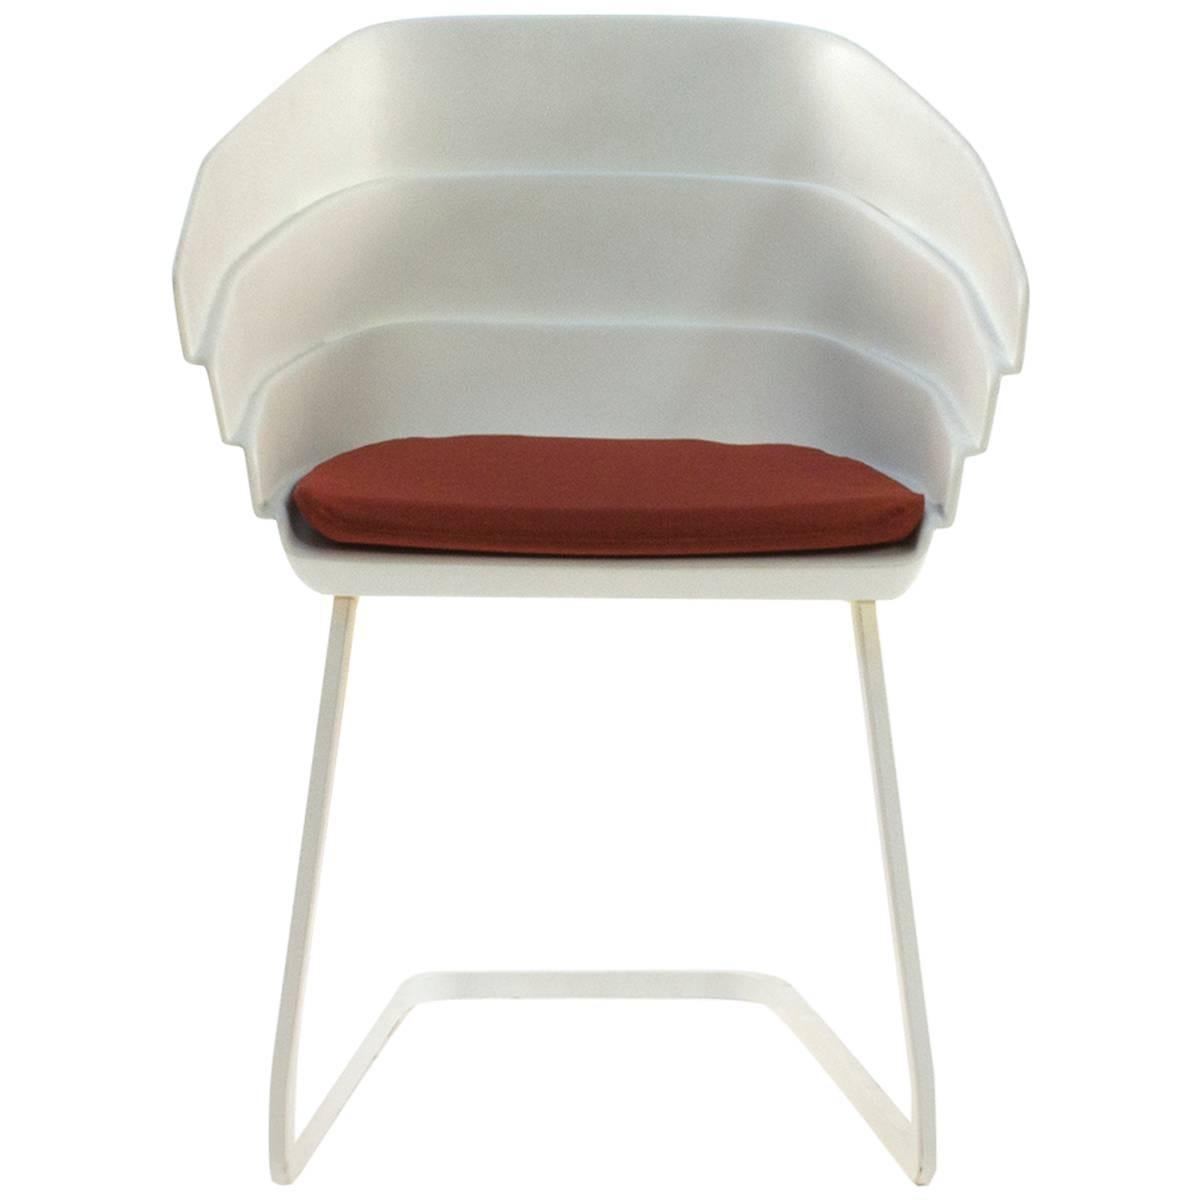 Moroso Rift Cantilever Arm Dining Chair by Patricia Urquiola, Italy For Sale